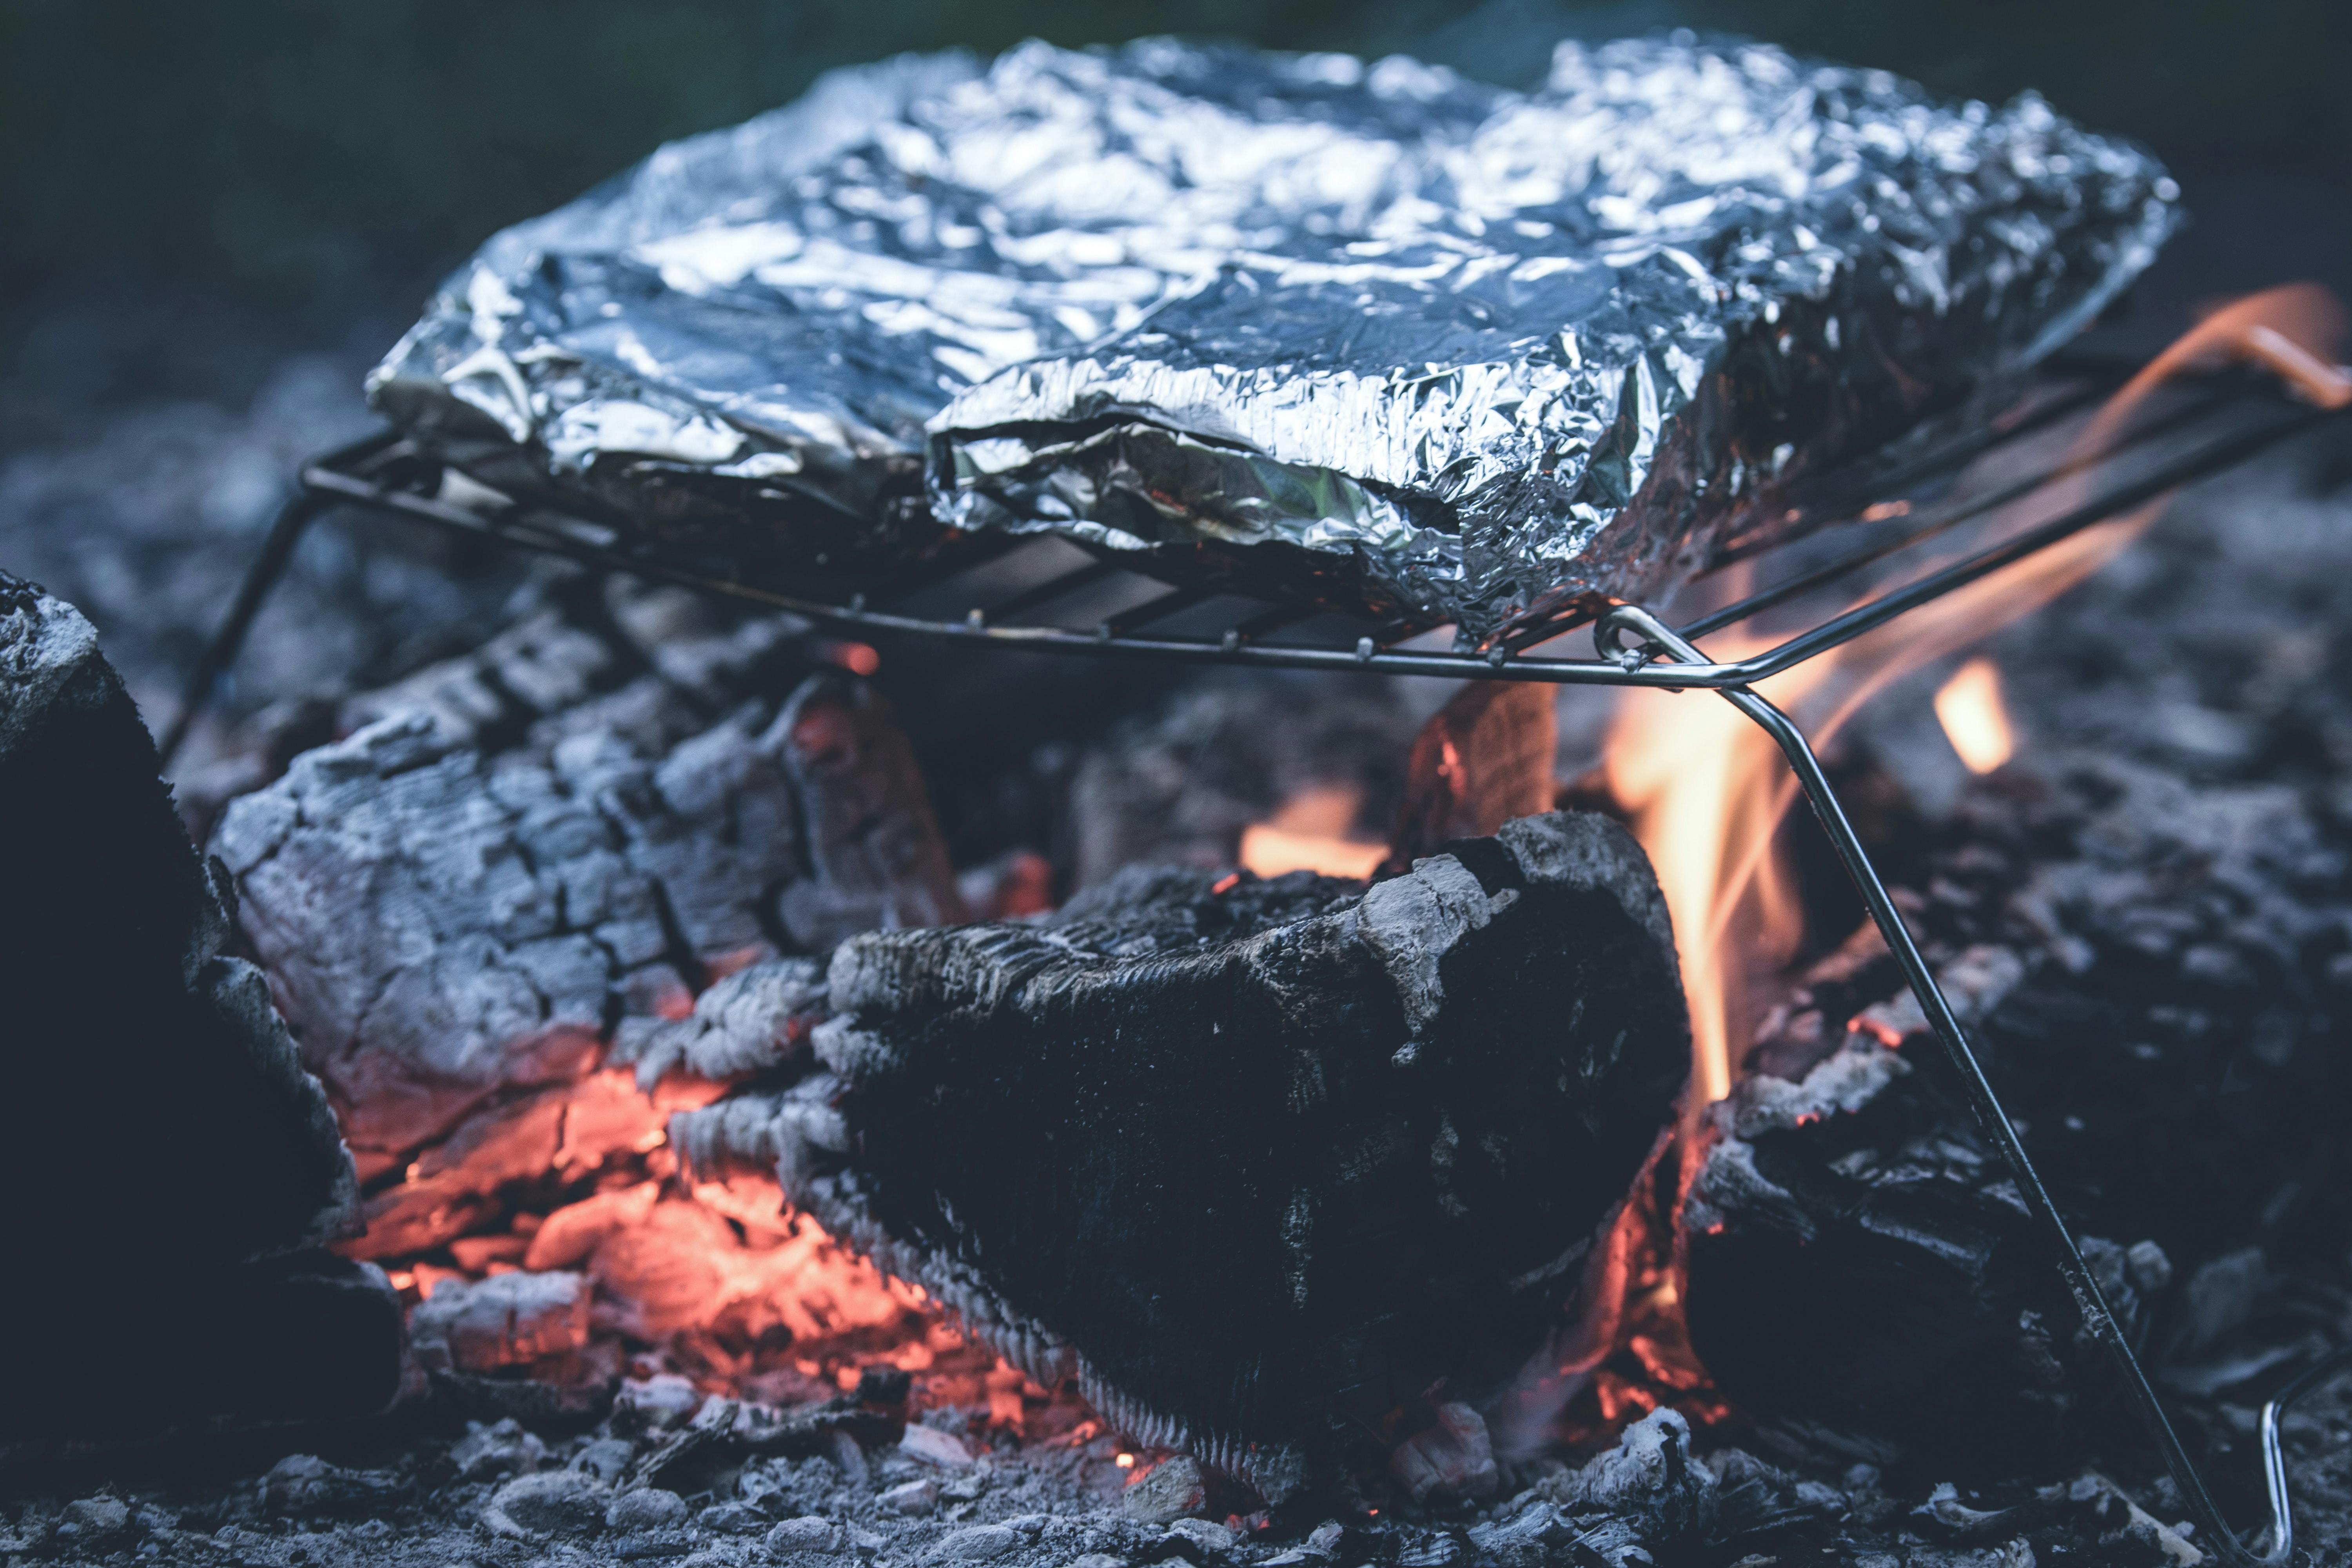 Something is wrapped in foil and placed on a grill above hot, smoldering logs and a small flame.